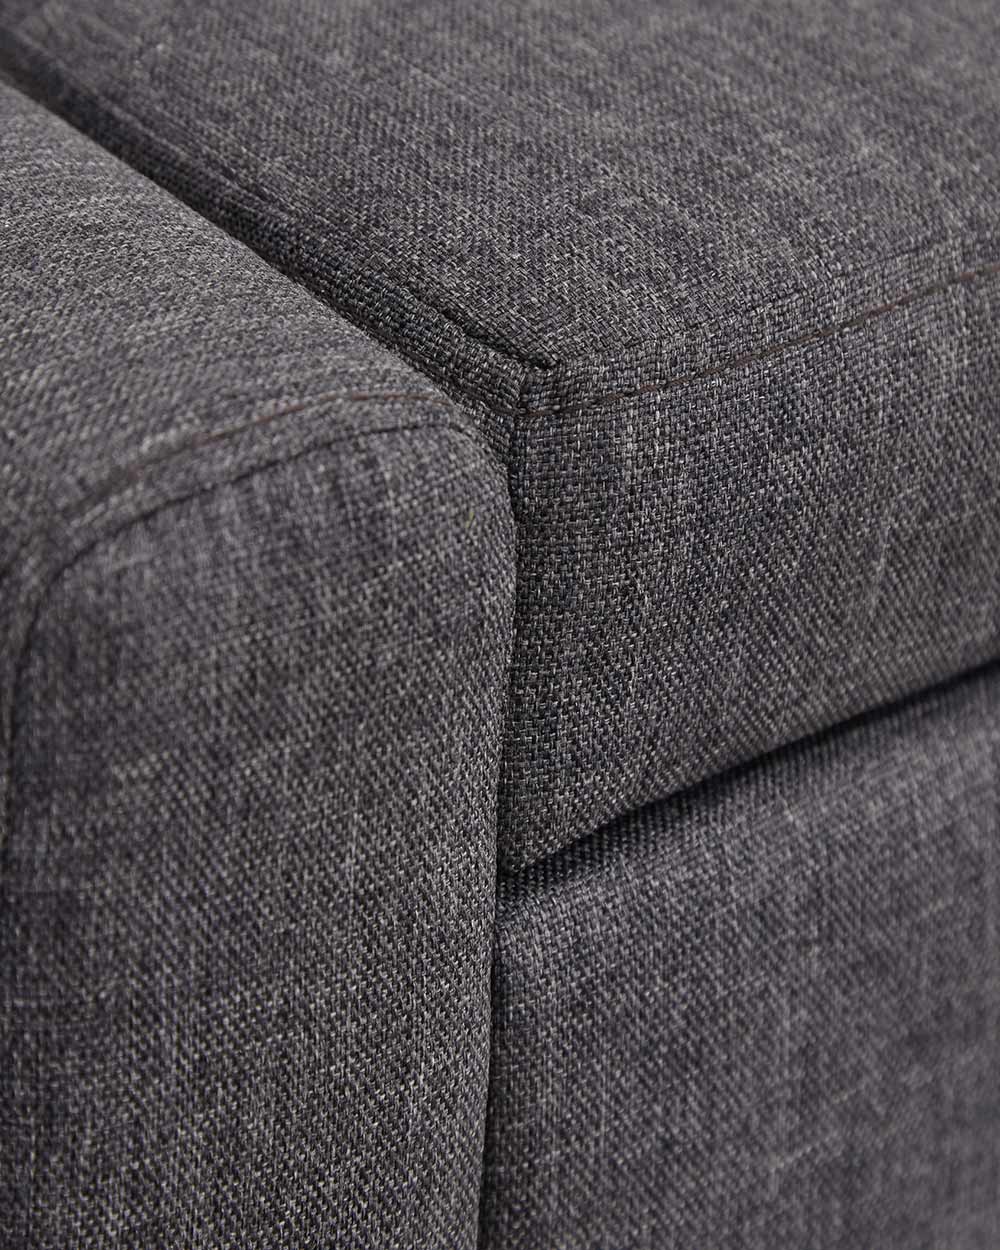 close up of the smart charcoal grey fabric